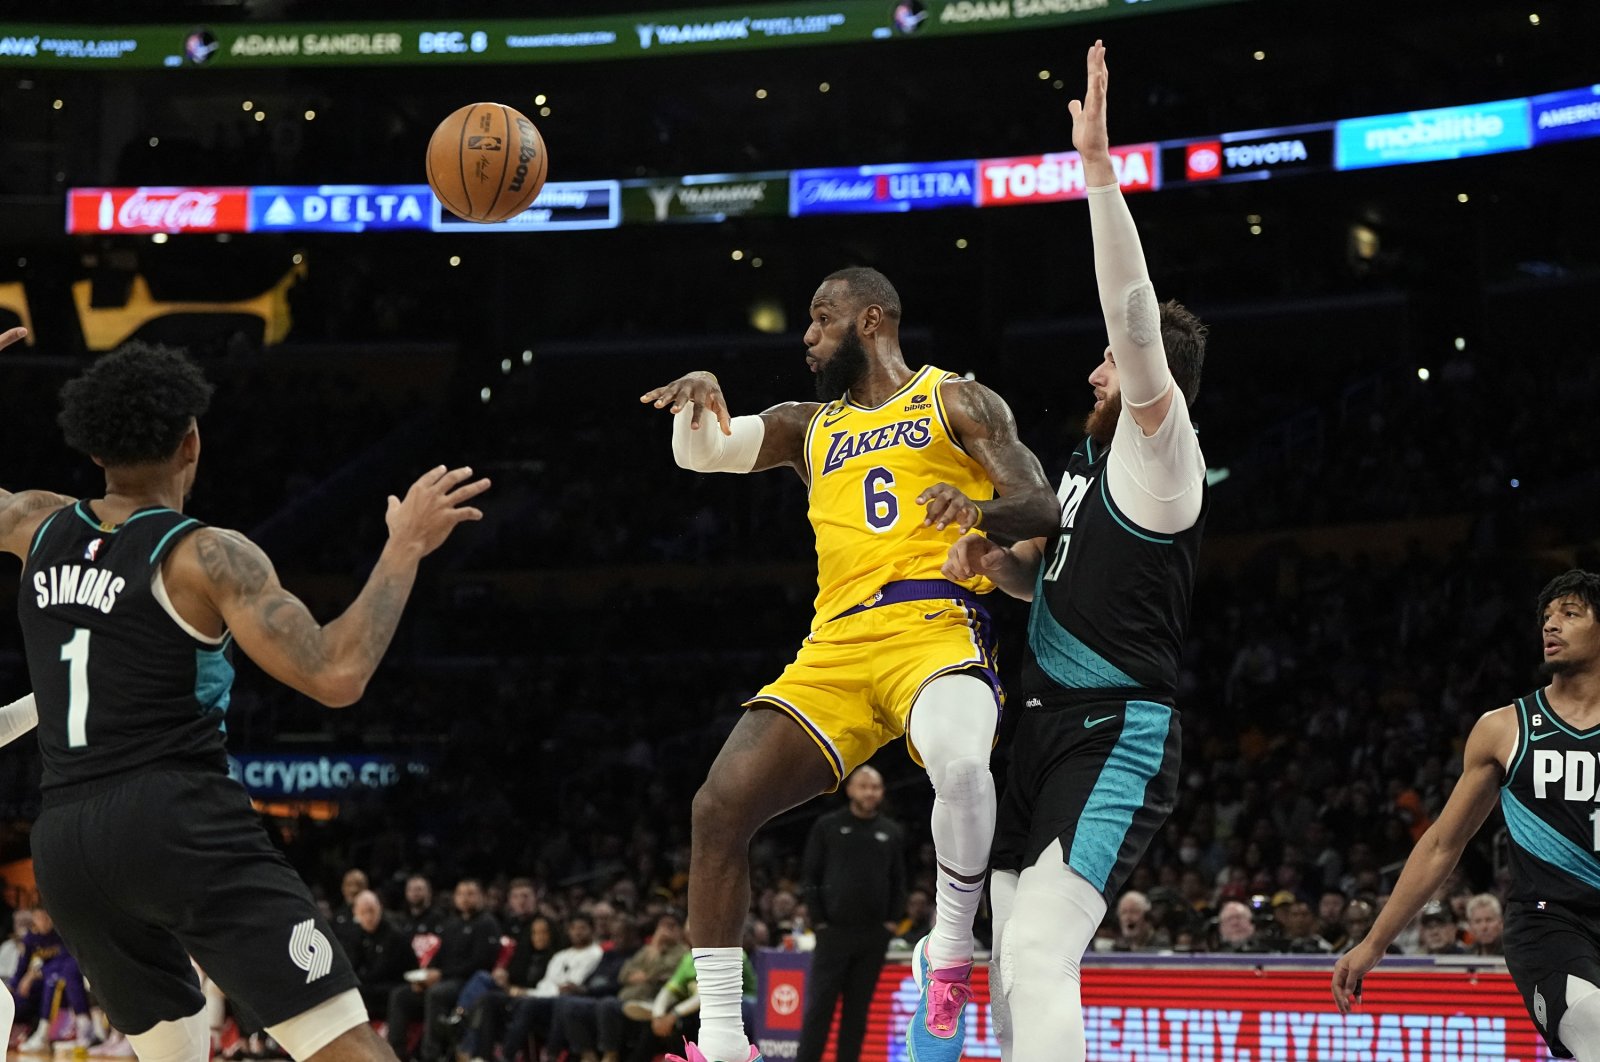 Los Angeles Lakers&#039; LeBron James makes a no-look pass to teammate Austin Reaves (not pictured), who scored a three-point basket, as James is guarded by Portland Trail Blazers&#039; Jusuf Nurkic in the second half at Crypto.com Arena, Los Angeles, California, U.S., Nov.30, 2022. (AFP Photo)